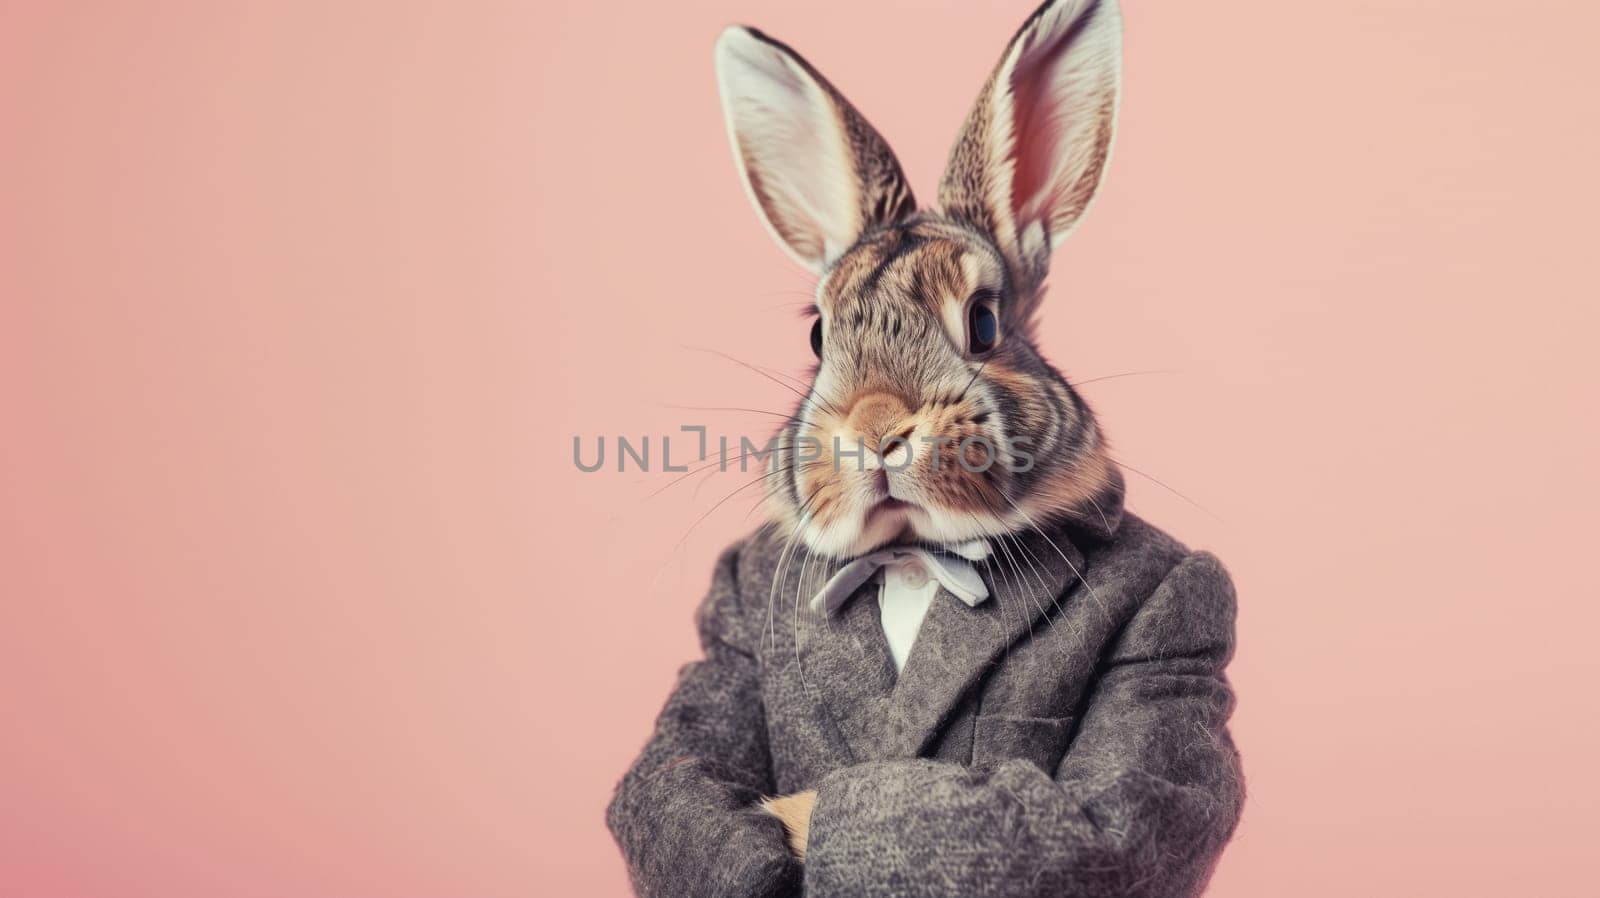 Cute funny bunny in a suit looking at the camera on a pink background, animal, creative concept